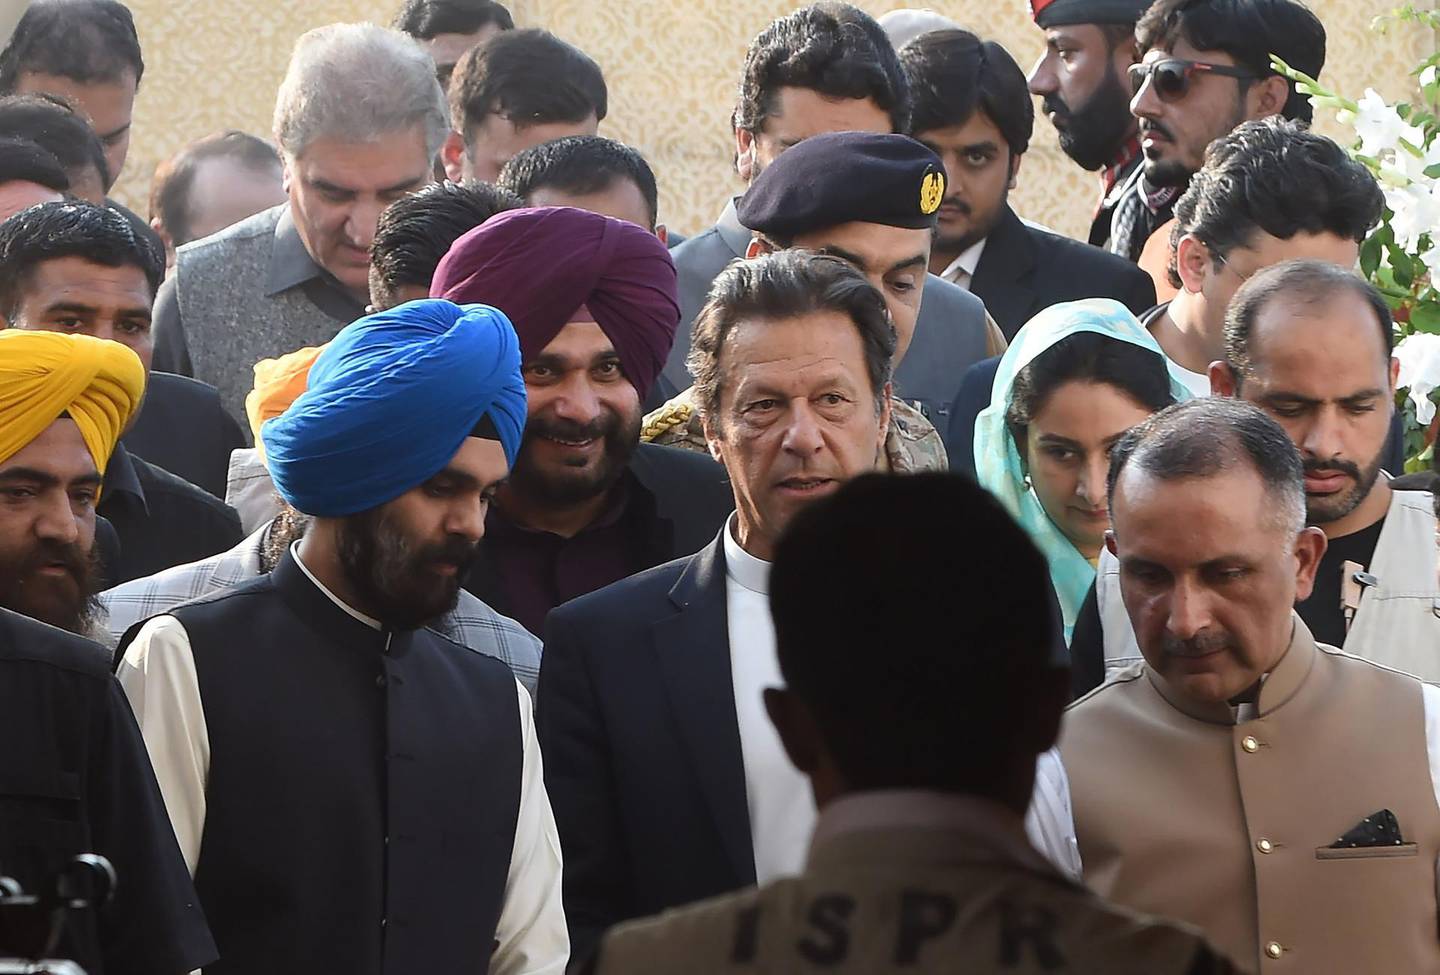 Pakistan Prime Minister Imran Khan (C) and alongside Indian Minister for Food Processing Industries Harsimrat Kaur Badal (2R) and India's Punjab cabinet minister and former cricketer Navjot Singh Sidhu (3L), arrive to attend the groundbreaking ceremony for the Kartarpur Corridor in Kartarpur on November 28, 2018. Pakistan Prime Minister Imran Khan launched the groundbreaking ceremony of the religious corridor between India and Pakistan. / AFP / ARIF ALI
